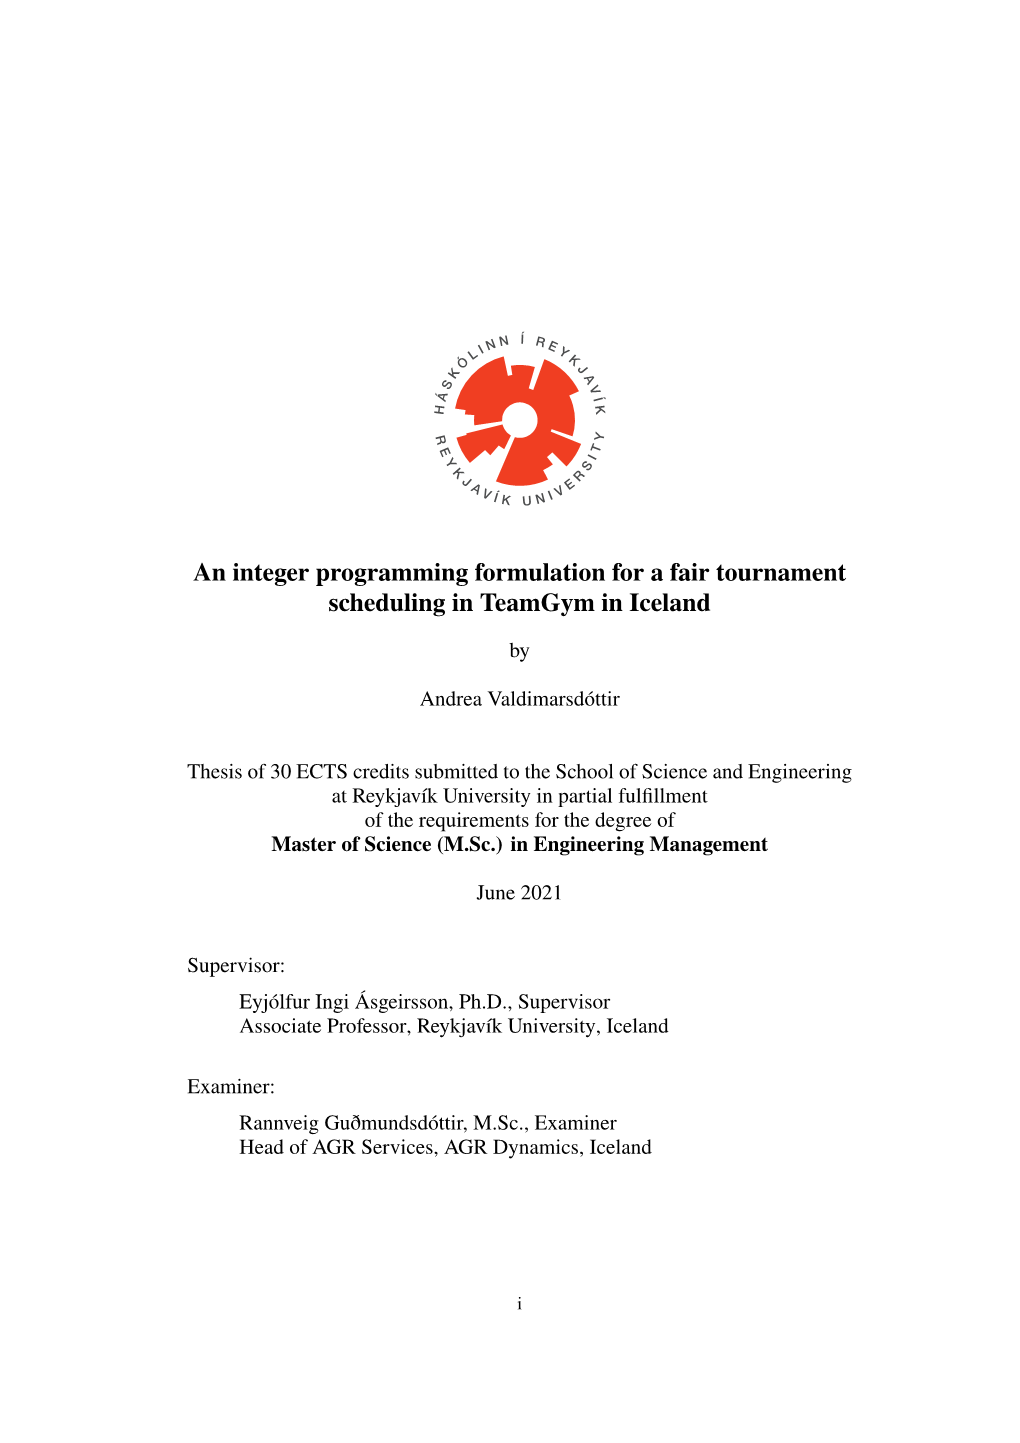 An Integer Programming Formulation for a Fair Tournament Scheduling in Teamgym in Iceland